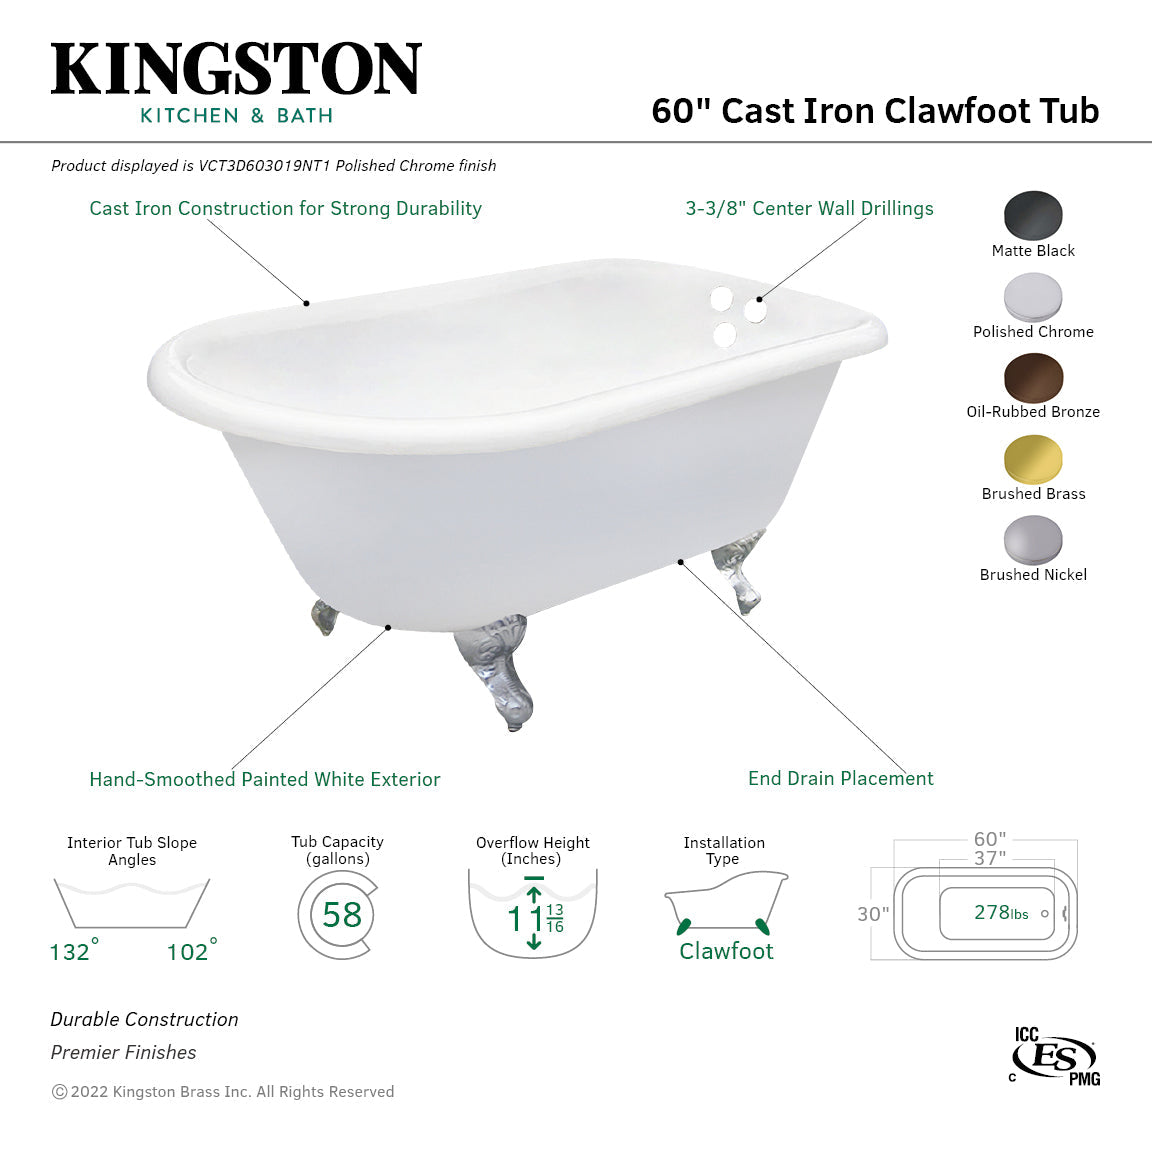 Aqua Eden VCT3D603019NT0 60-Inch Cast Iron Roll Top Clawfoot Tub with 3-3/8 Inch Wall Drillings, White/Matte Black